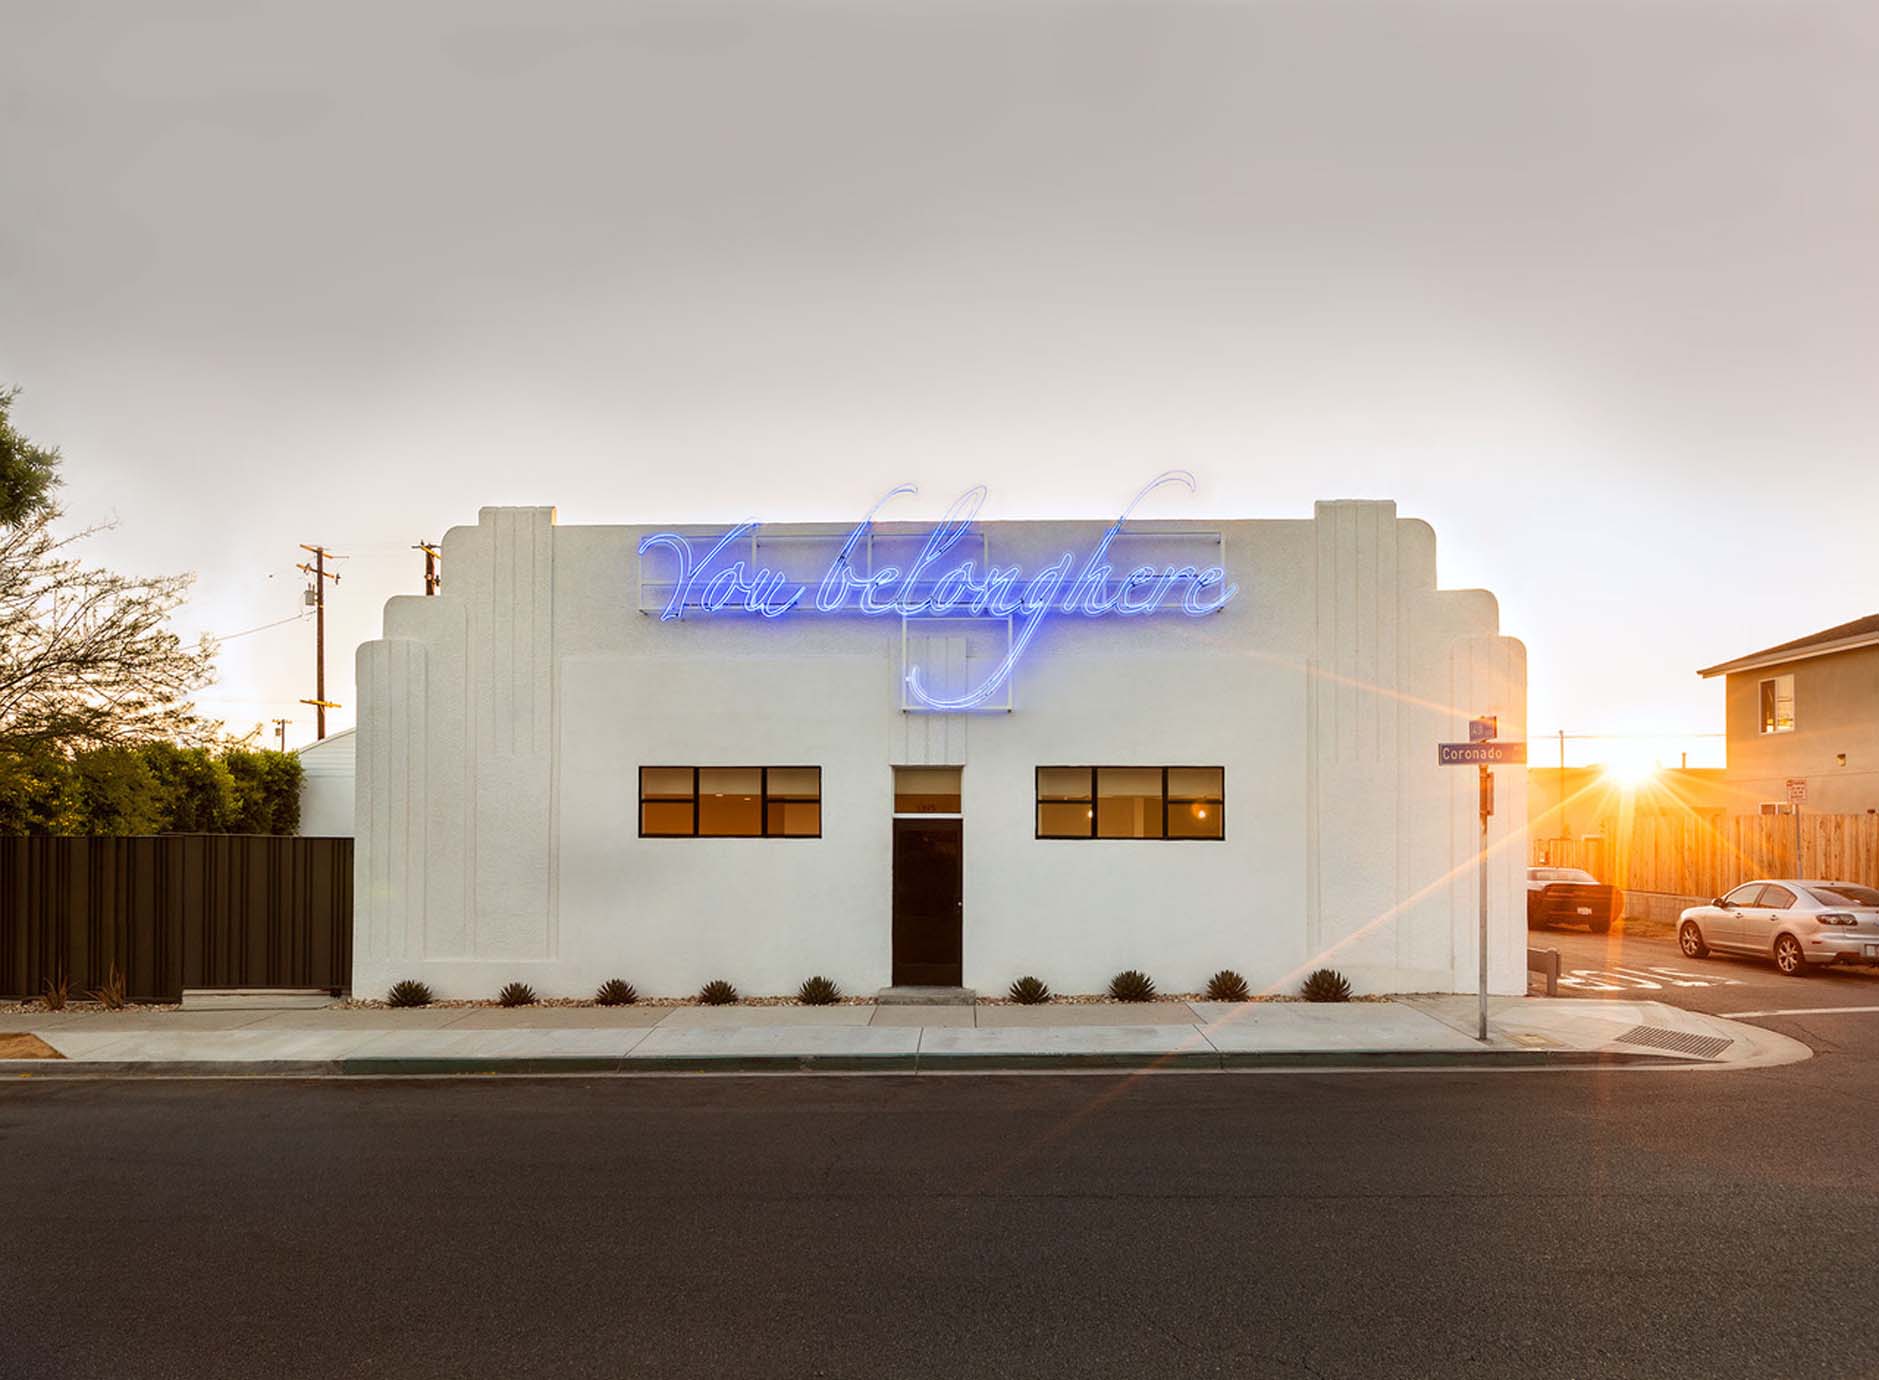 Tavares Strachan’s You Belong Here (Blue #1) (2019) installed on the exterior of Compound. 